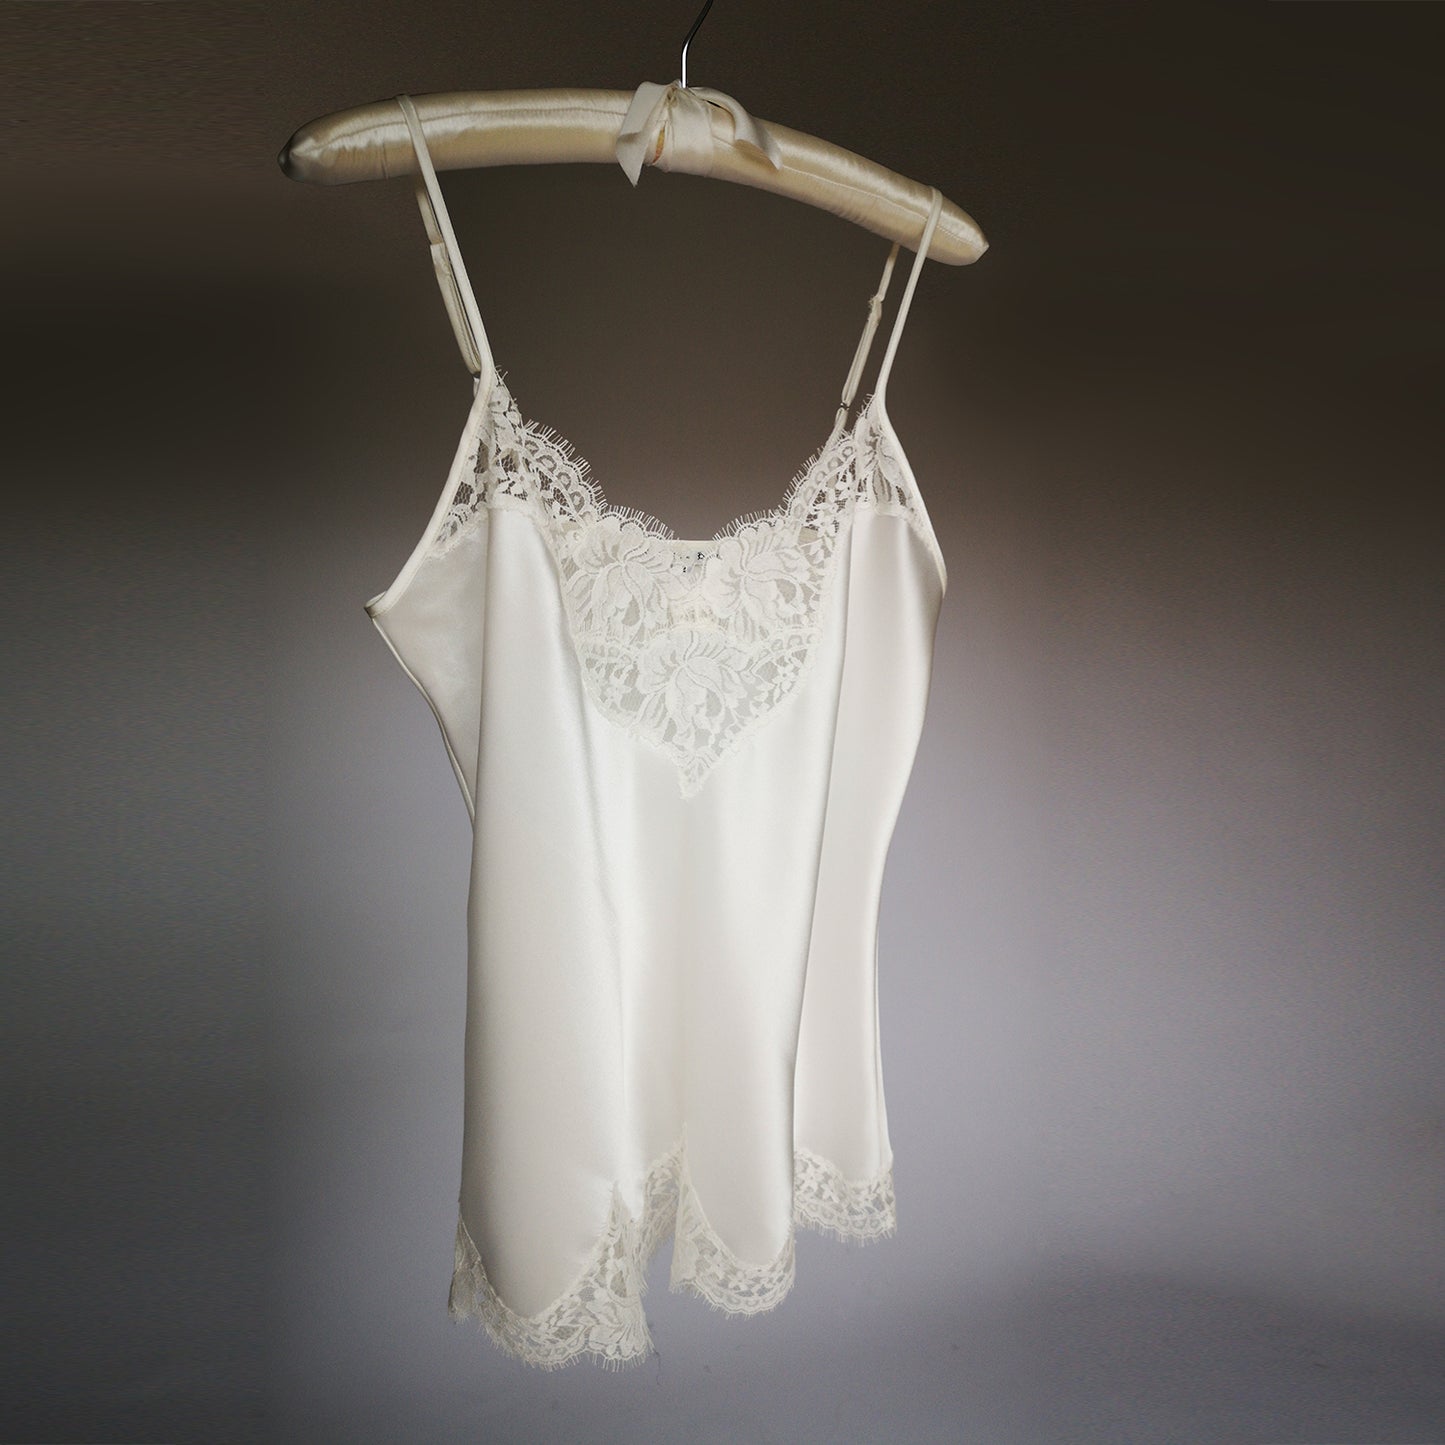 Silk Camisole with Scalloped French Lace